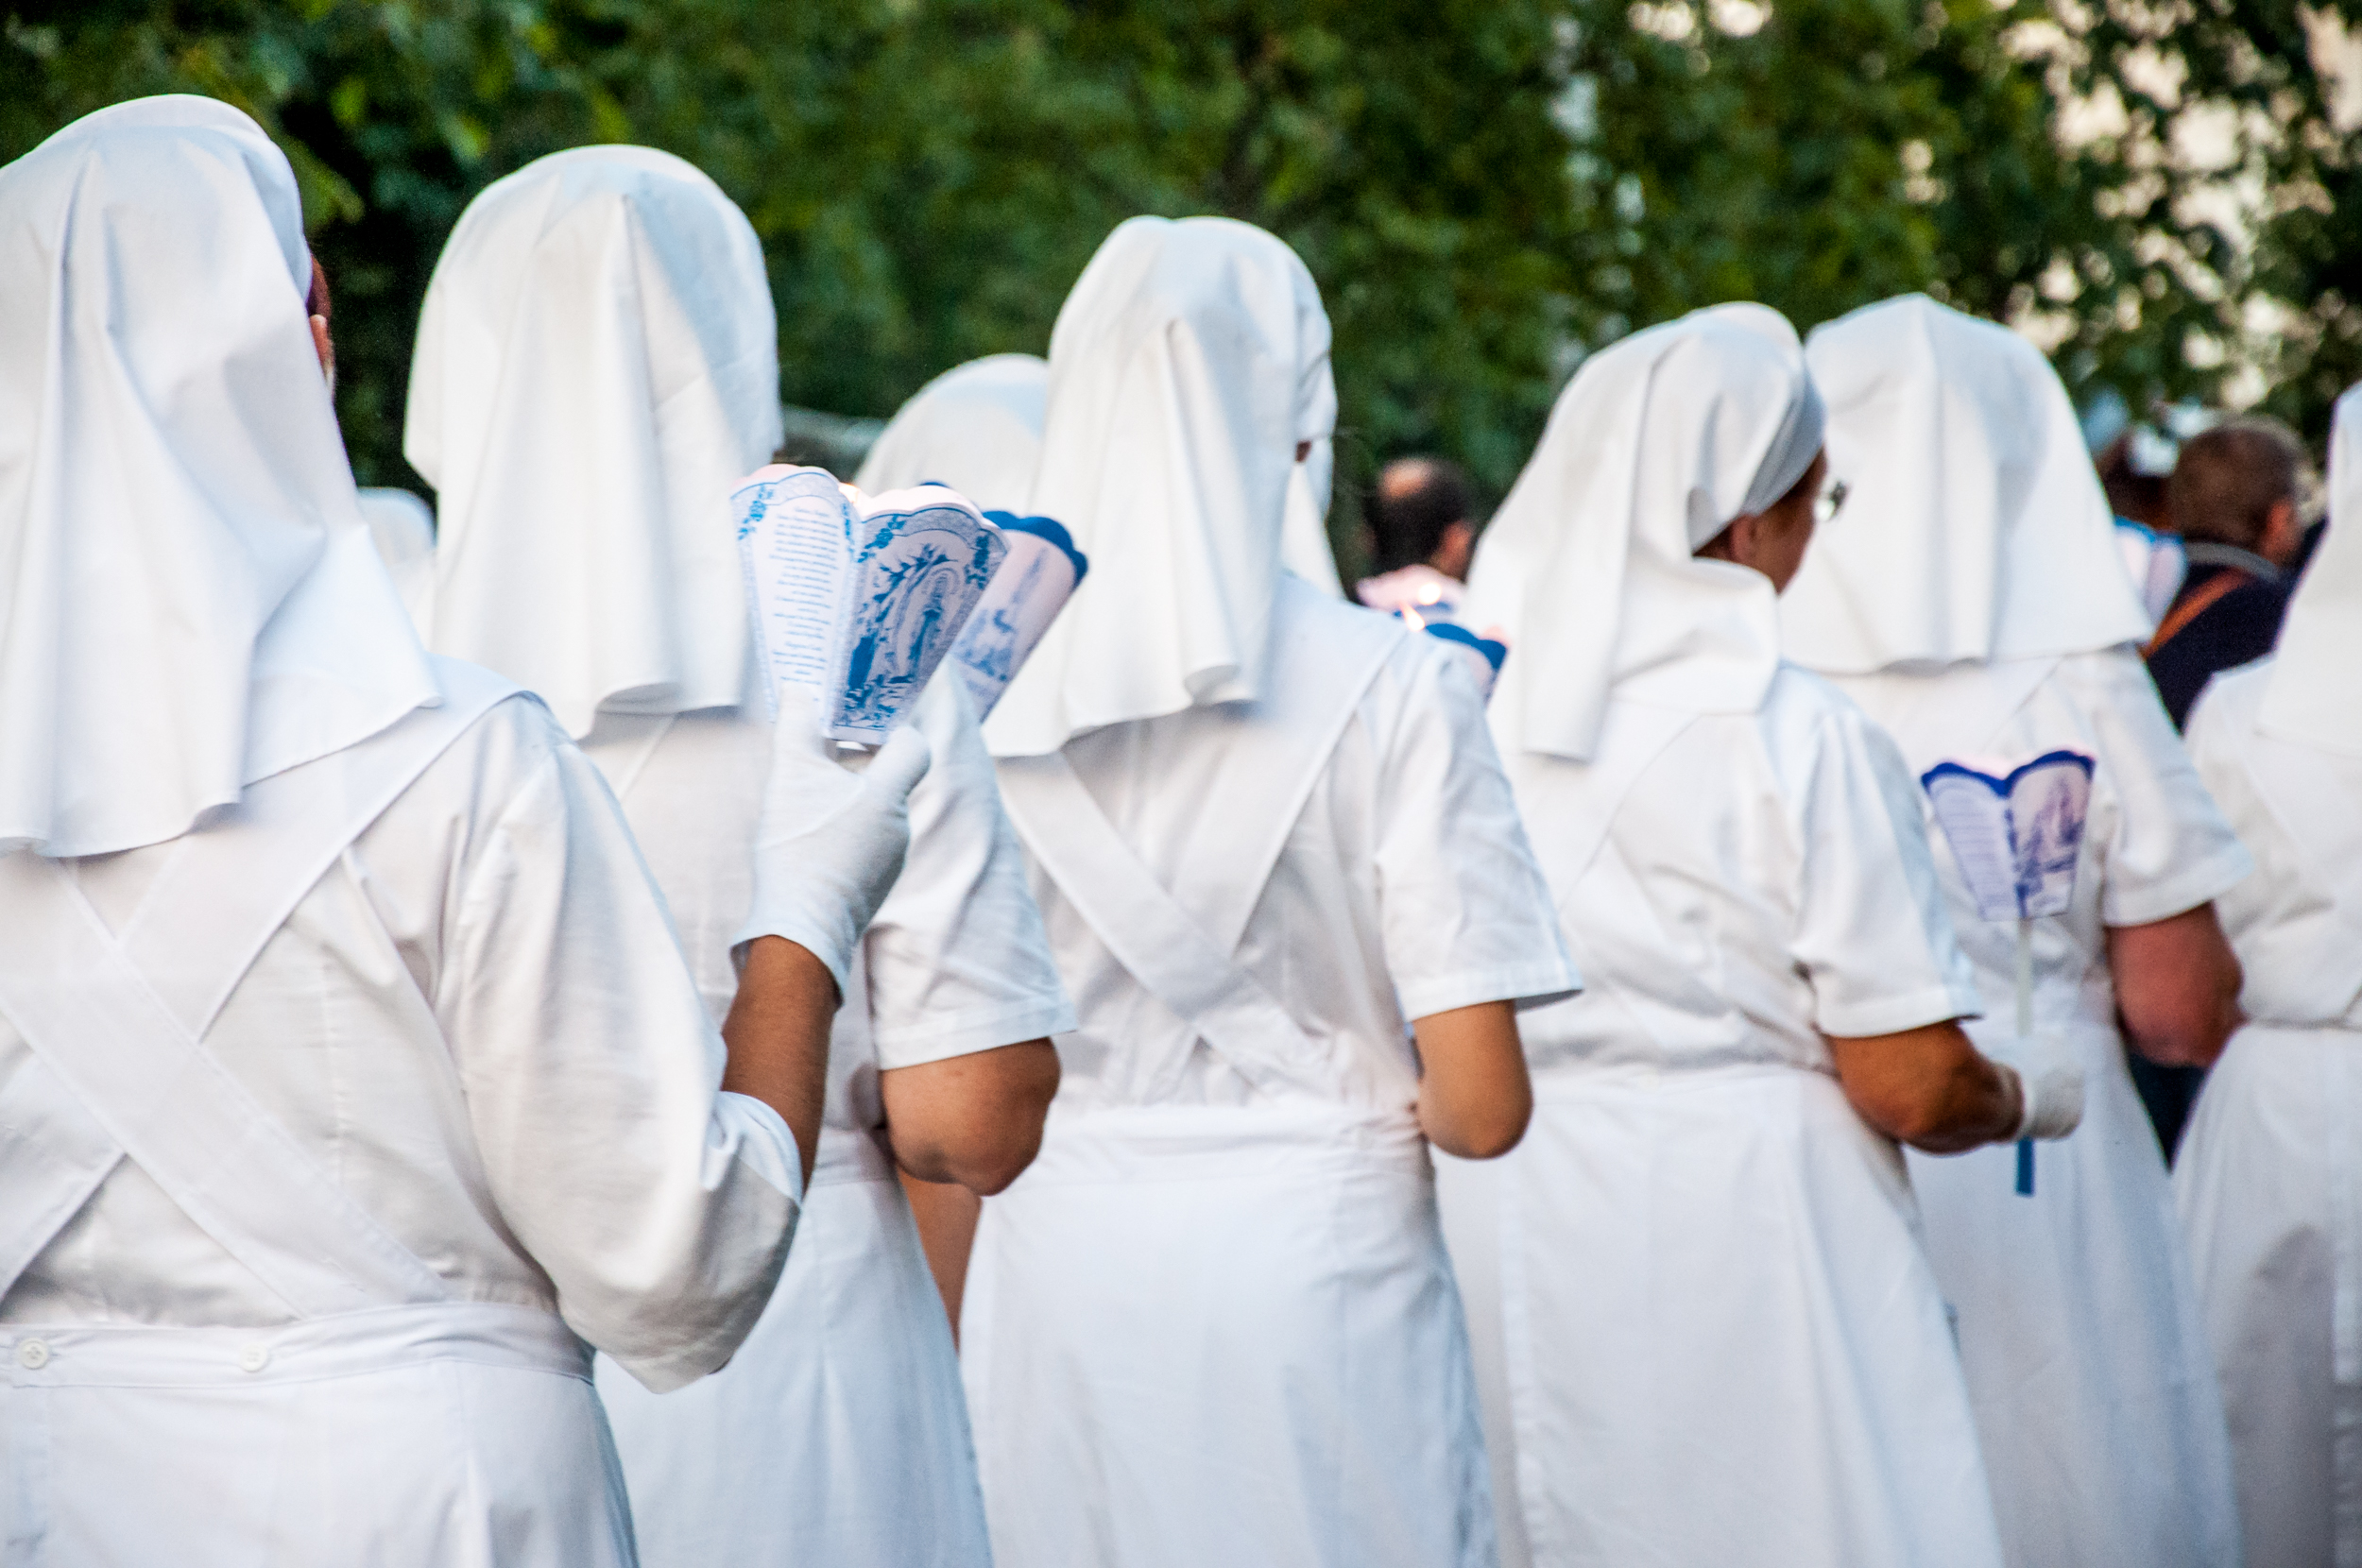 Sisters and nuns in lourdes photo